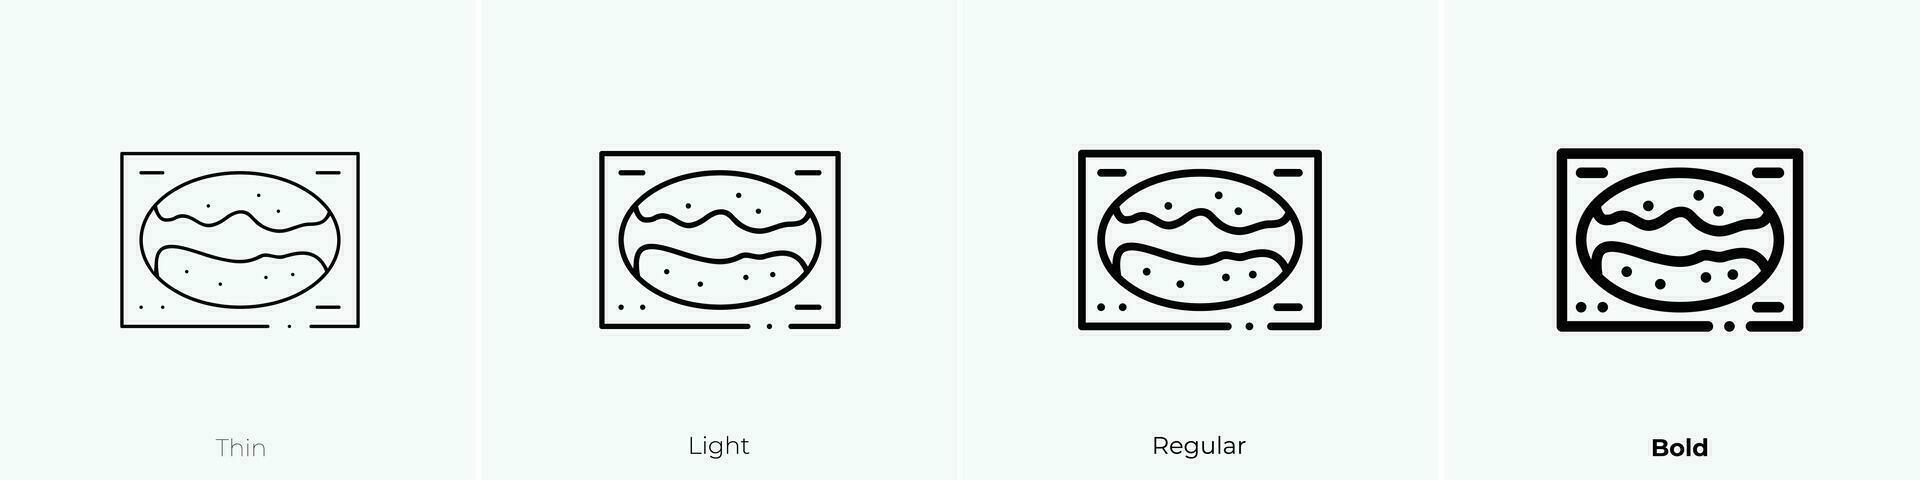 universe icon. Thin, Light, Regular And Bold style design isolated on white background vector